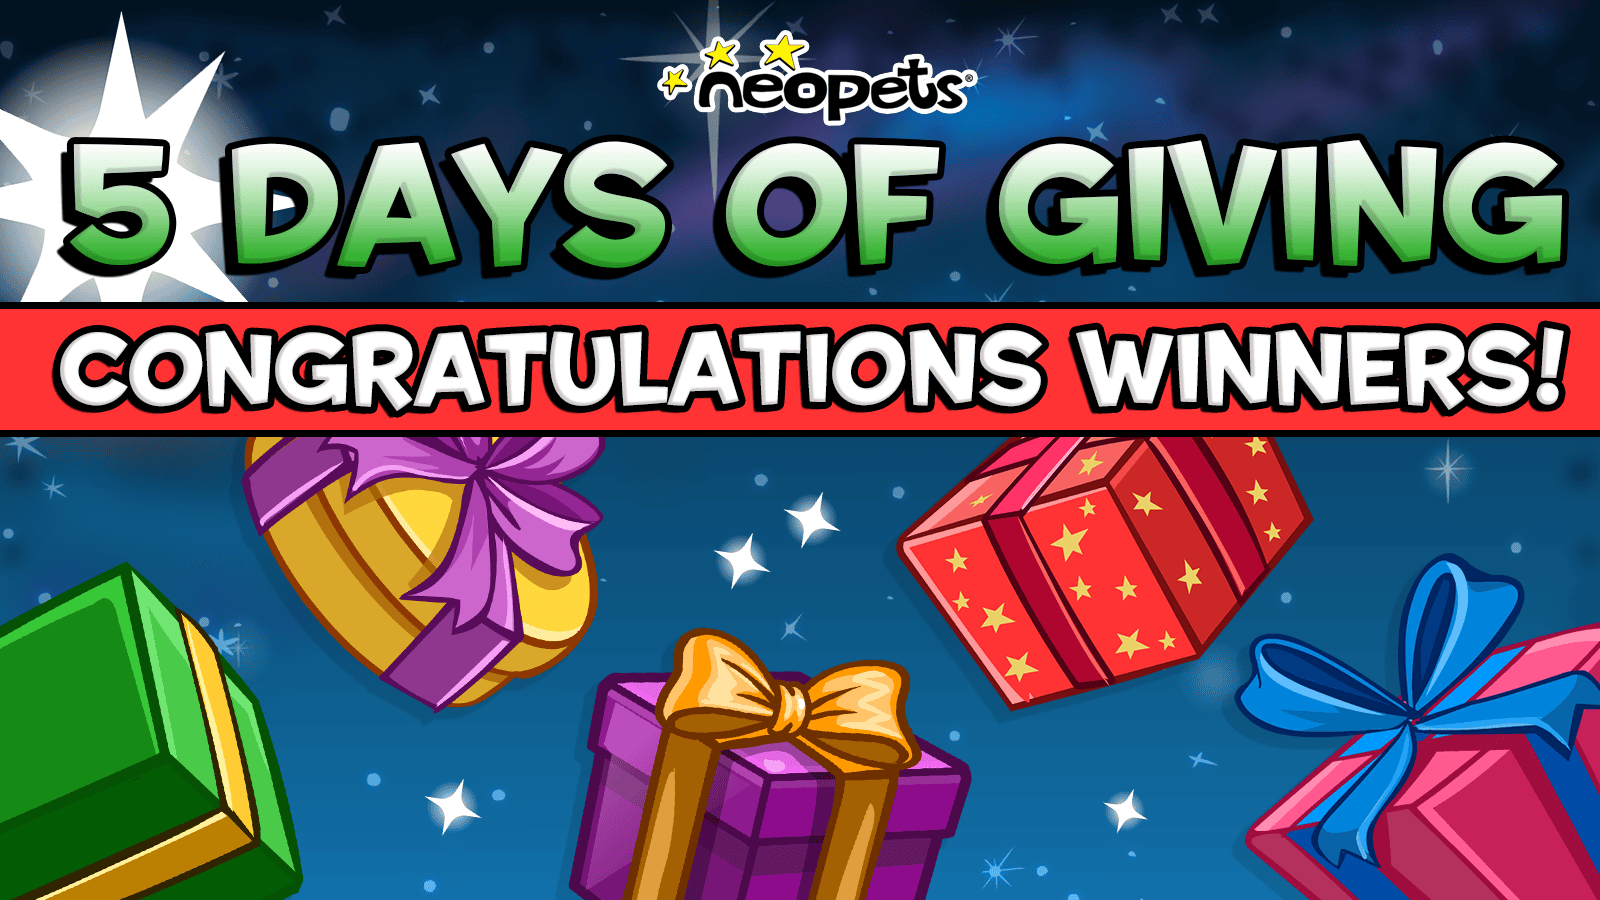  5 Days of Giving: Winners Announced As Holiday Cheer Hit Record Highs!